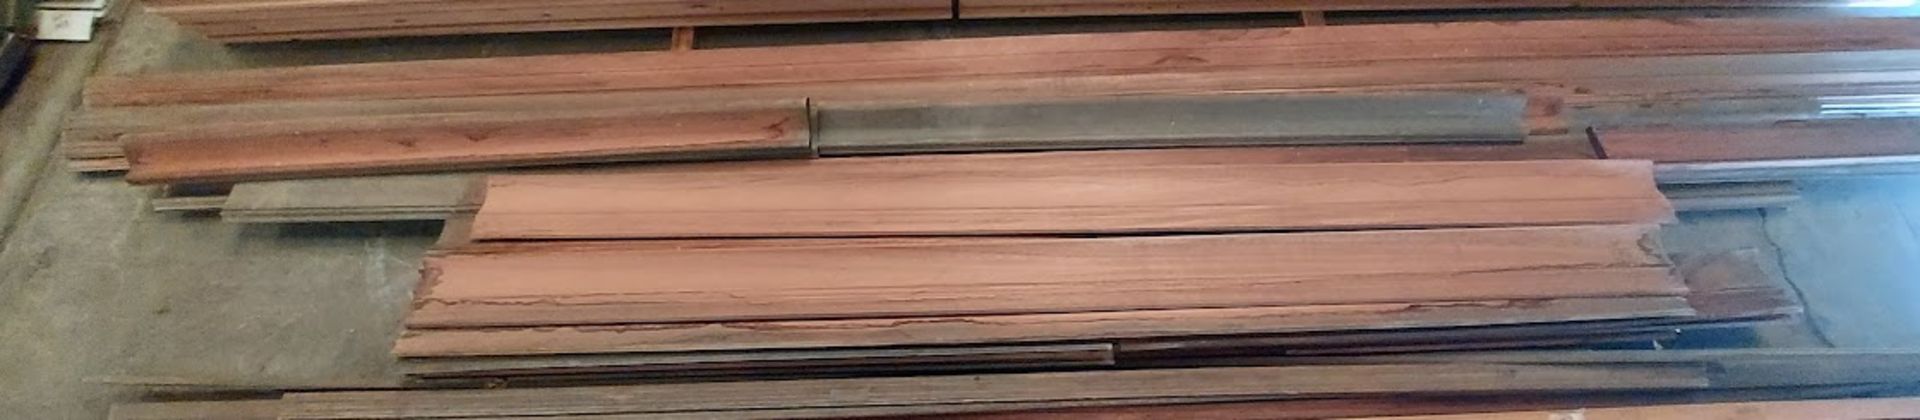 6-3/4" African Mahogany Crown Molding 8' Lengths, 2-1/4" African Mahogany & 5" African Mahogany